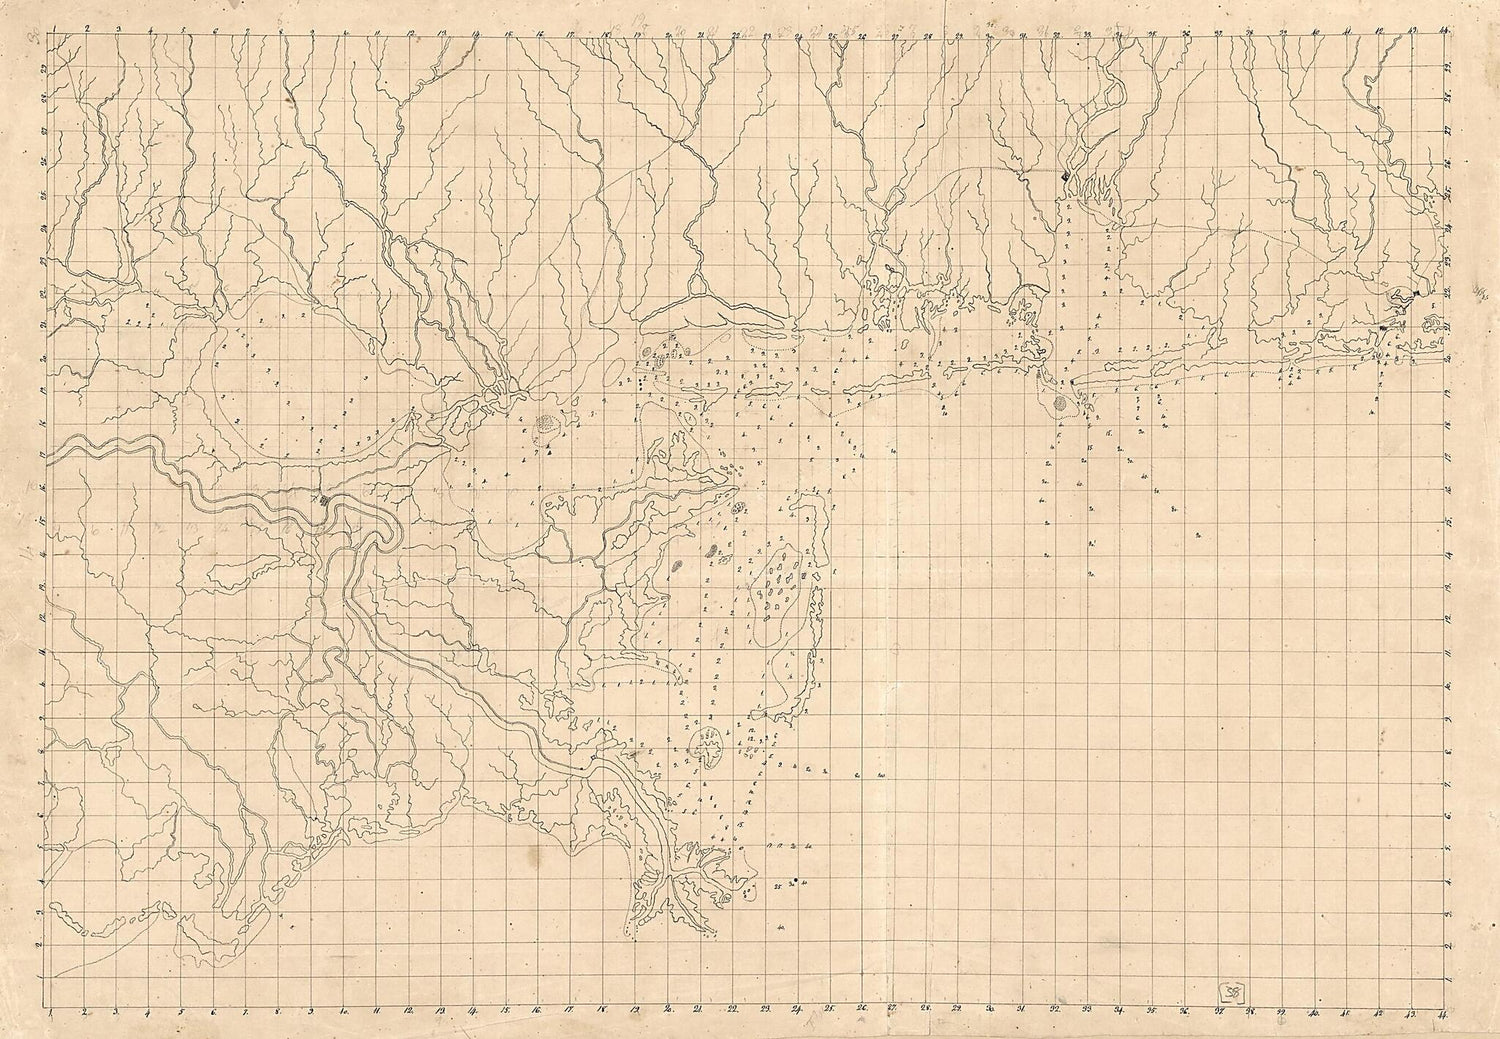 This old map of Map of an Area of Spanish West Florida from Lake Maurepas to Pensacola Bay from 1810 was created by Vicente Sebastián Pintado in 1810